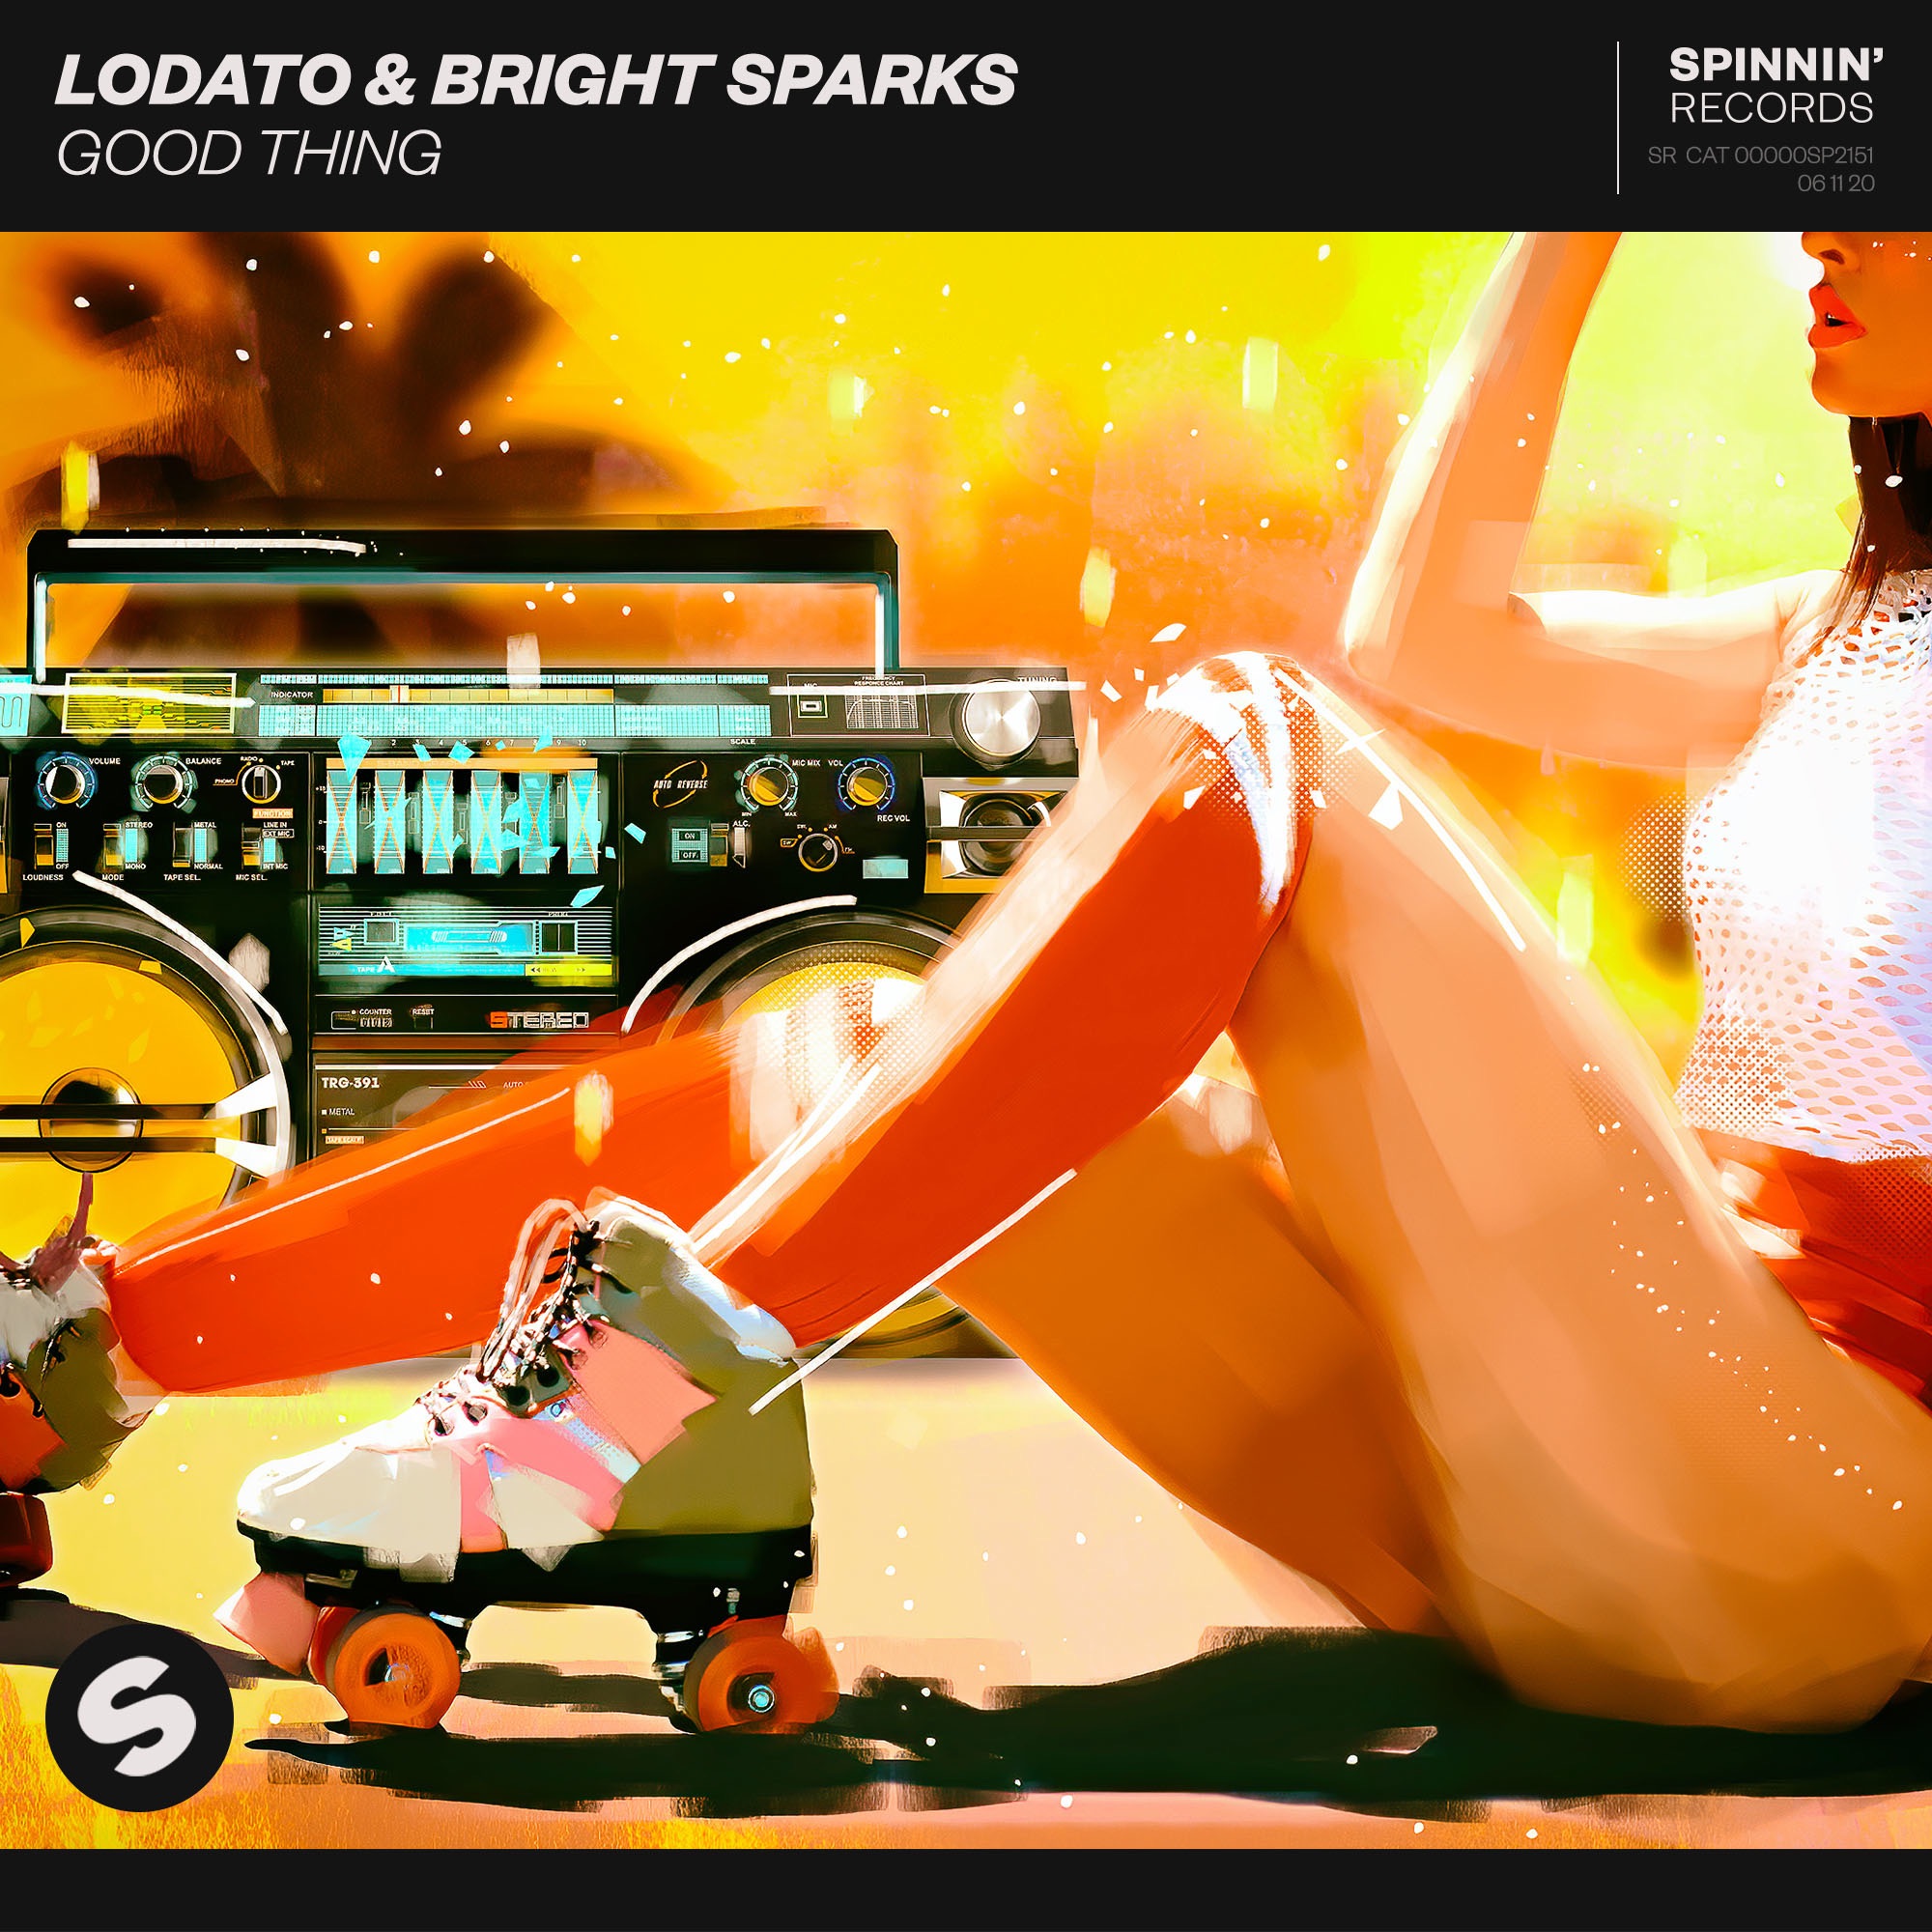 Lodato & Bright Sparks - Good Thing - Single